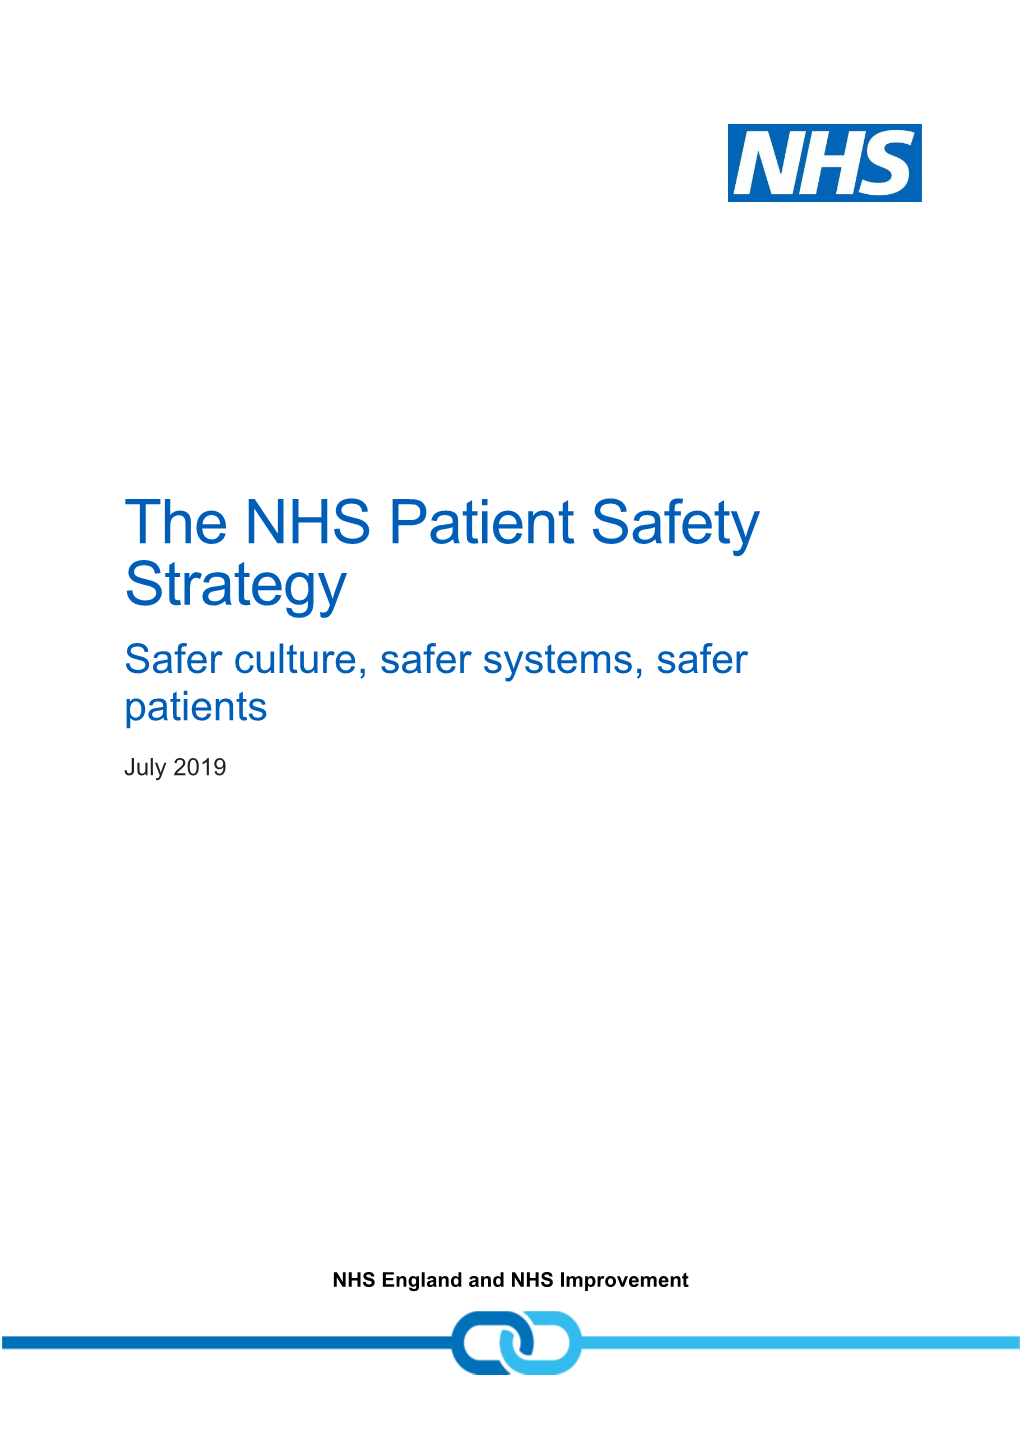 Patient Safety Strategy Safer Culture, Safer Systems, Safer Patients